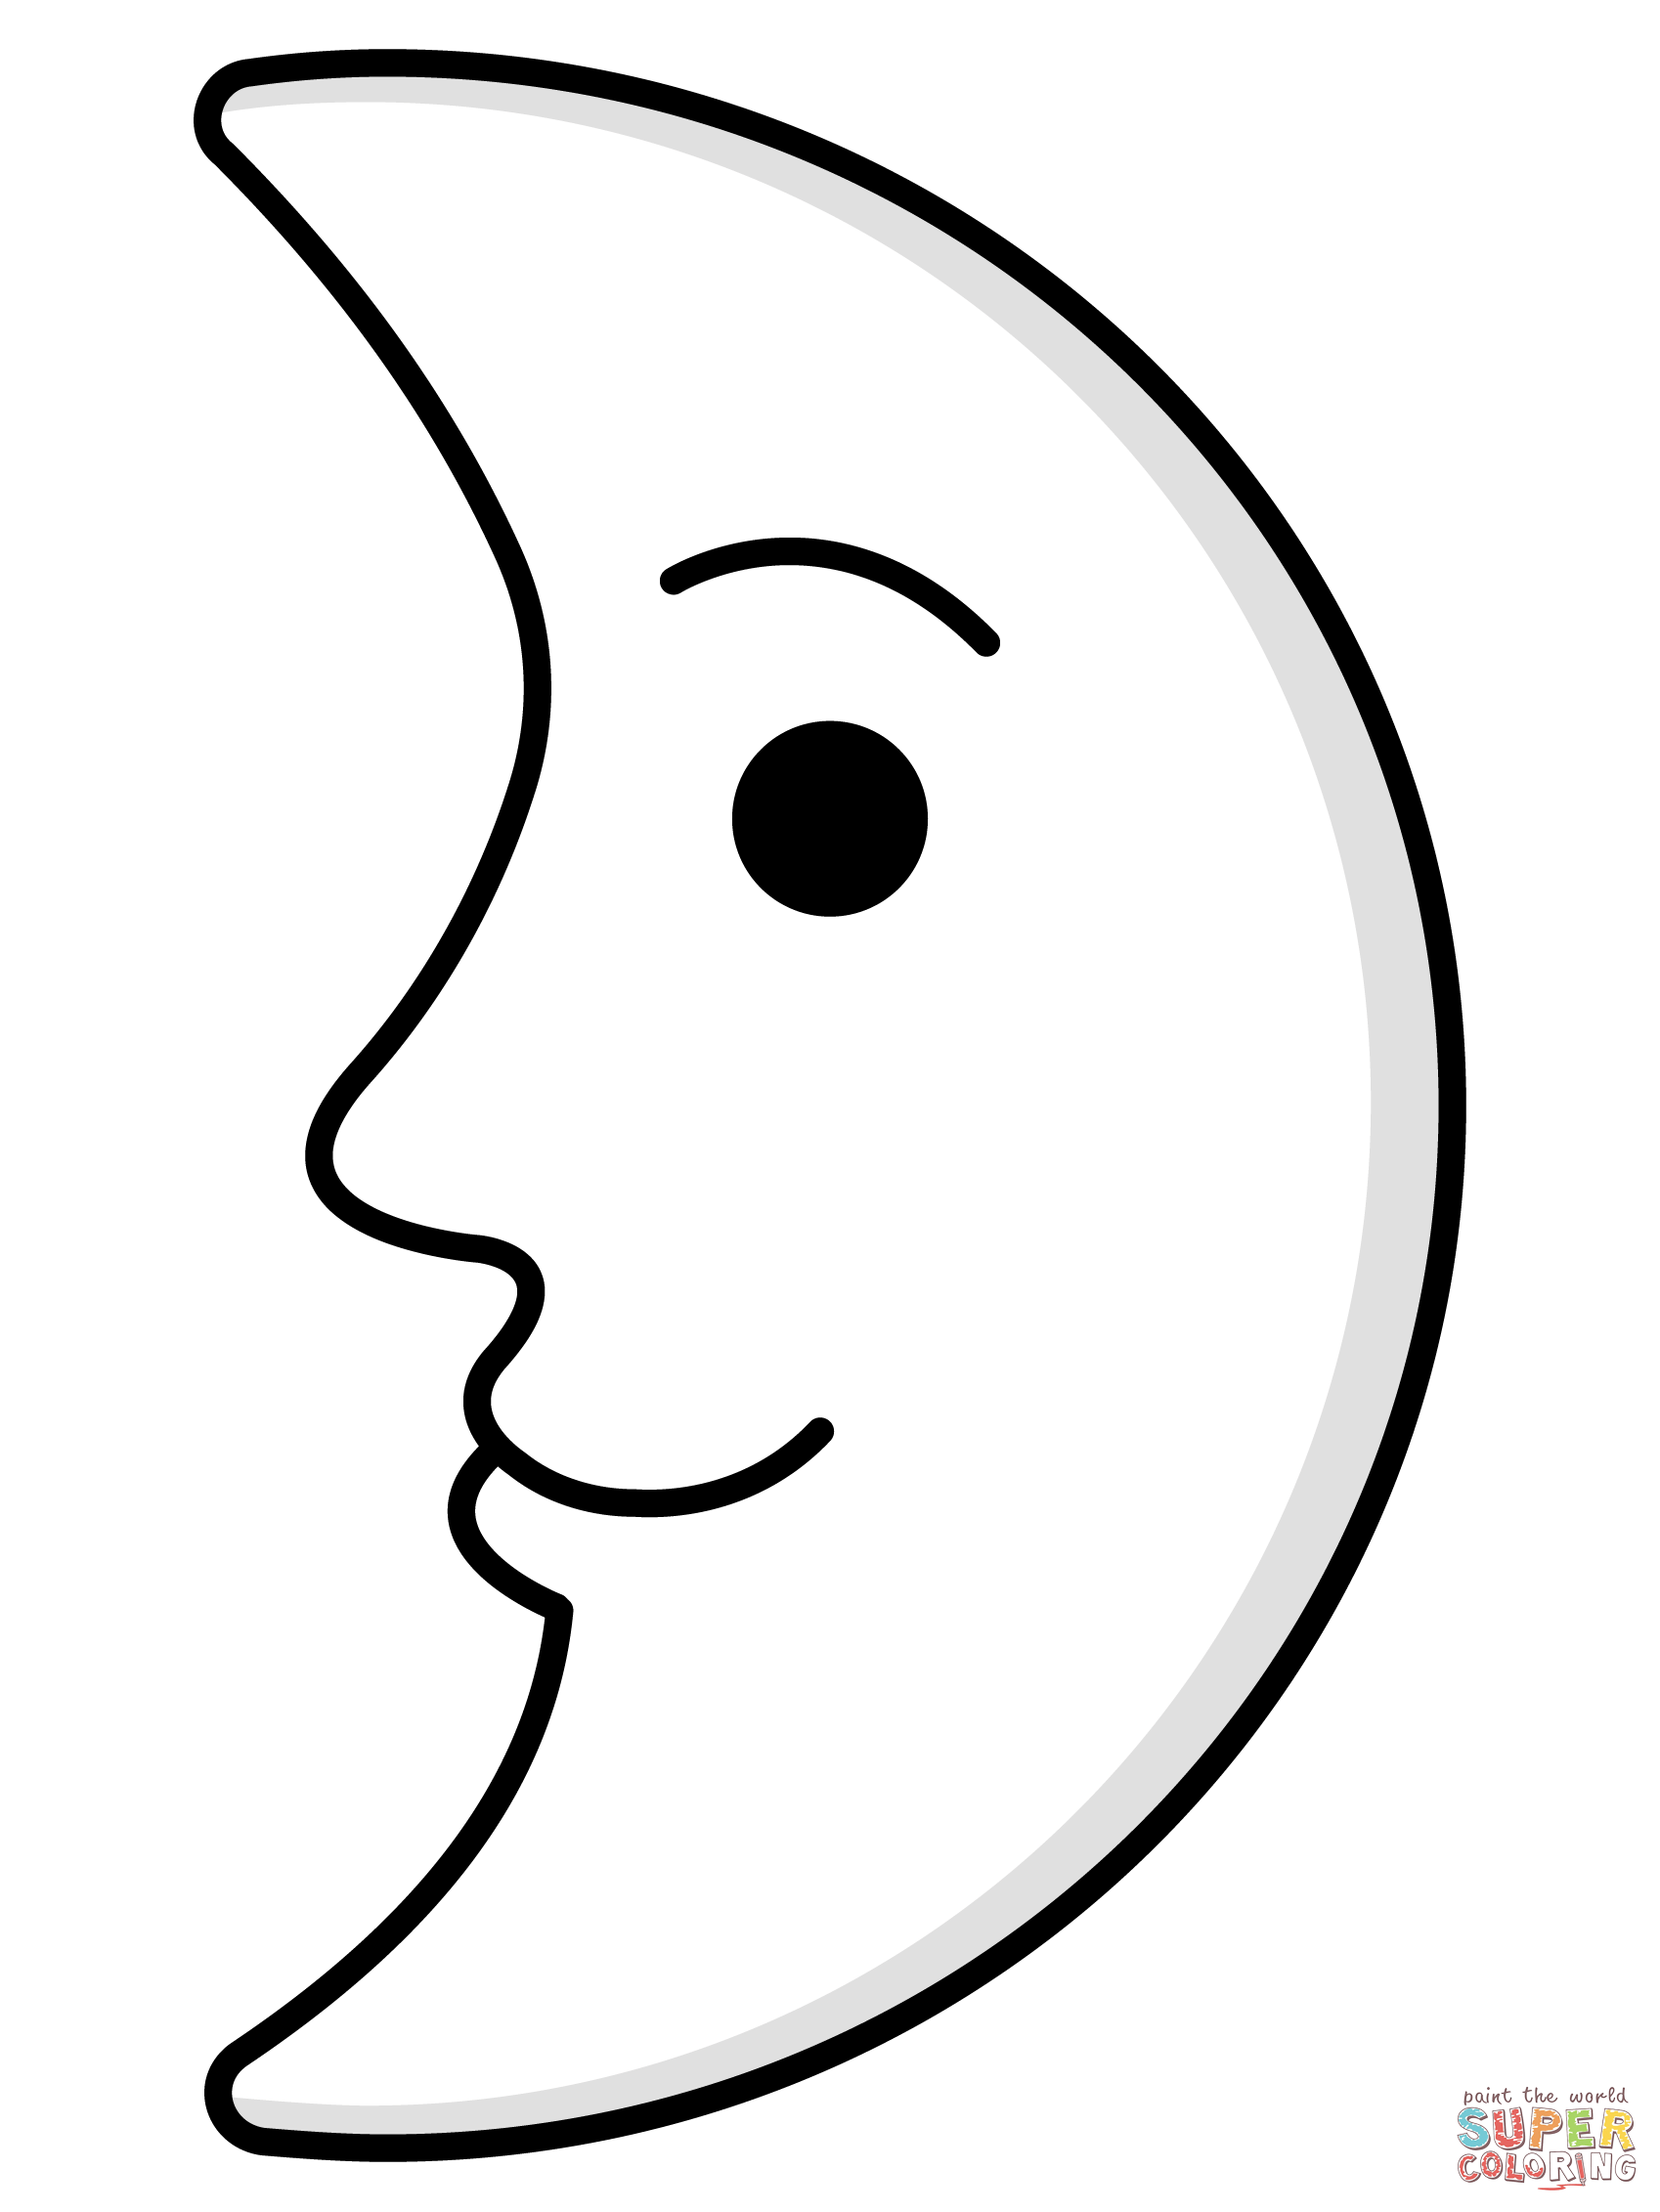 First quarter moon face emoji coloring page free printable coloring pages